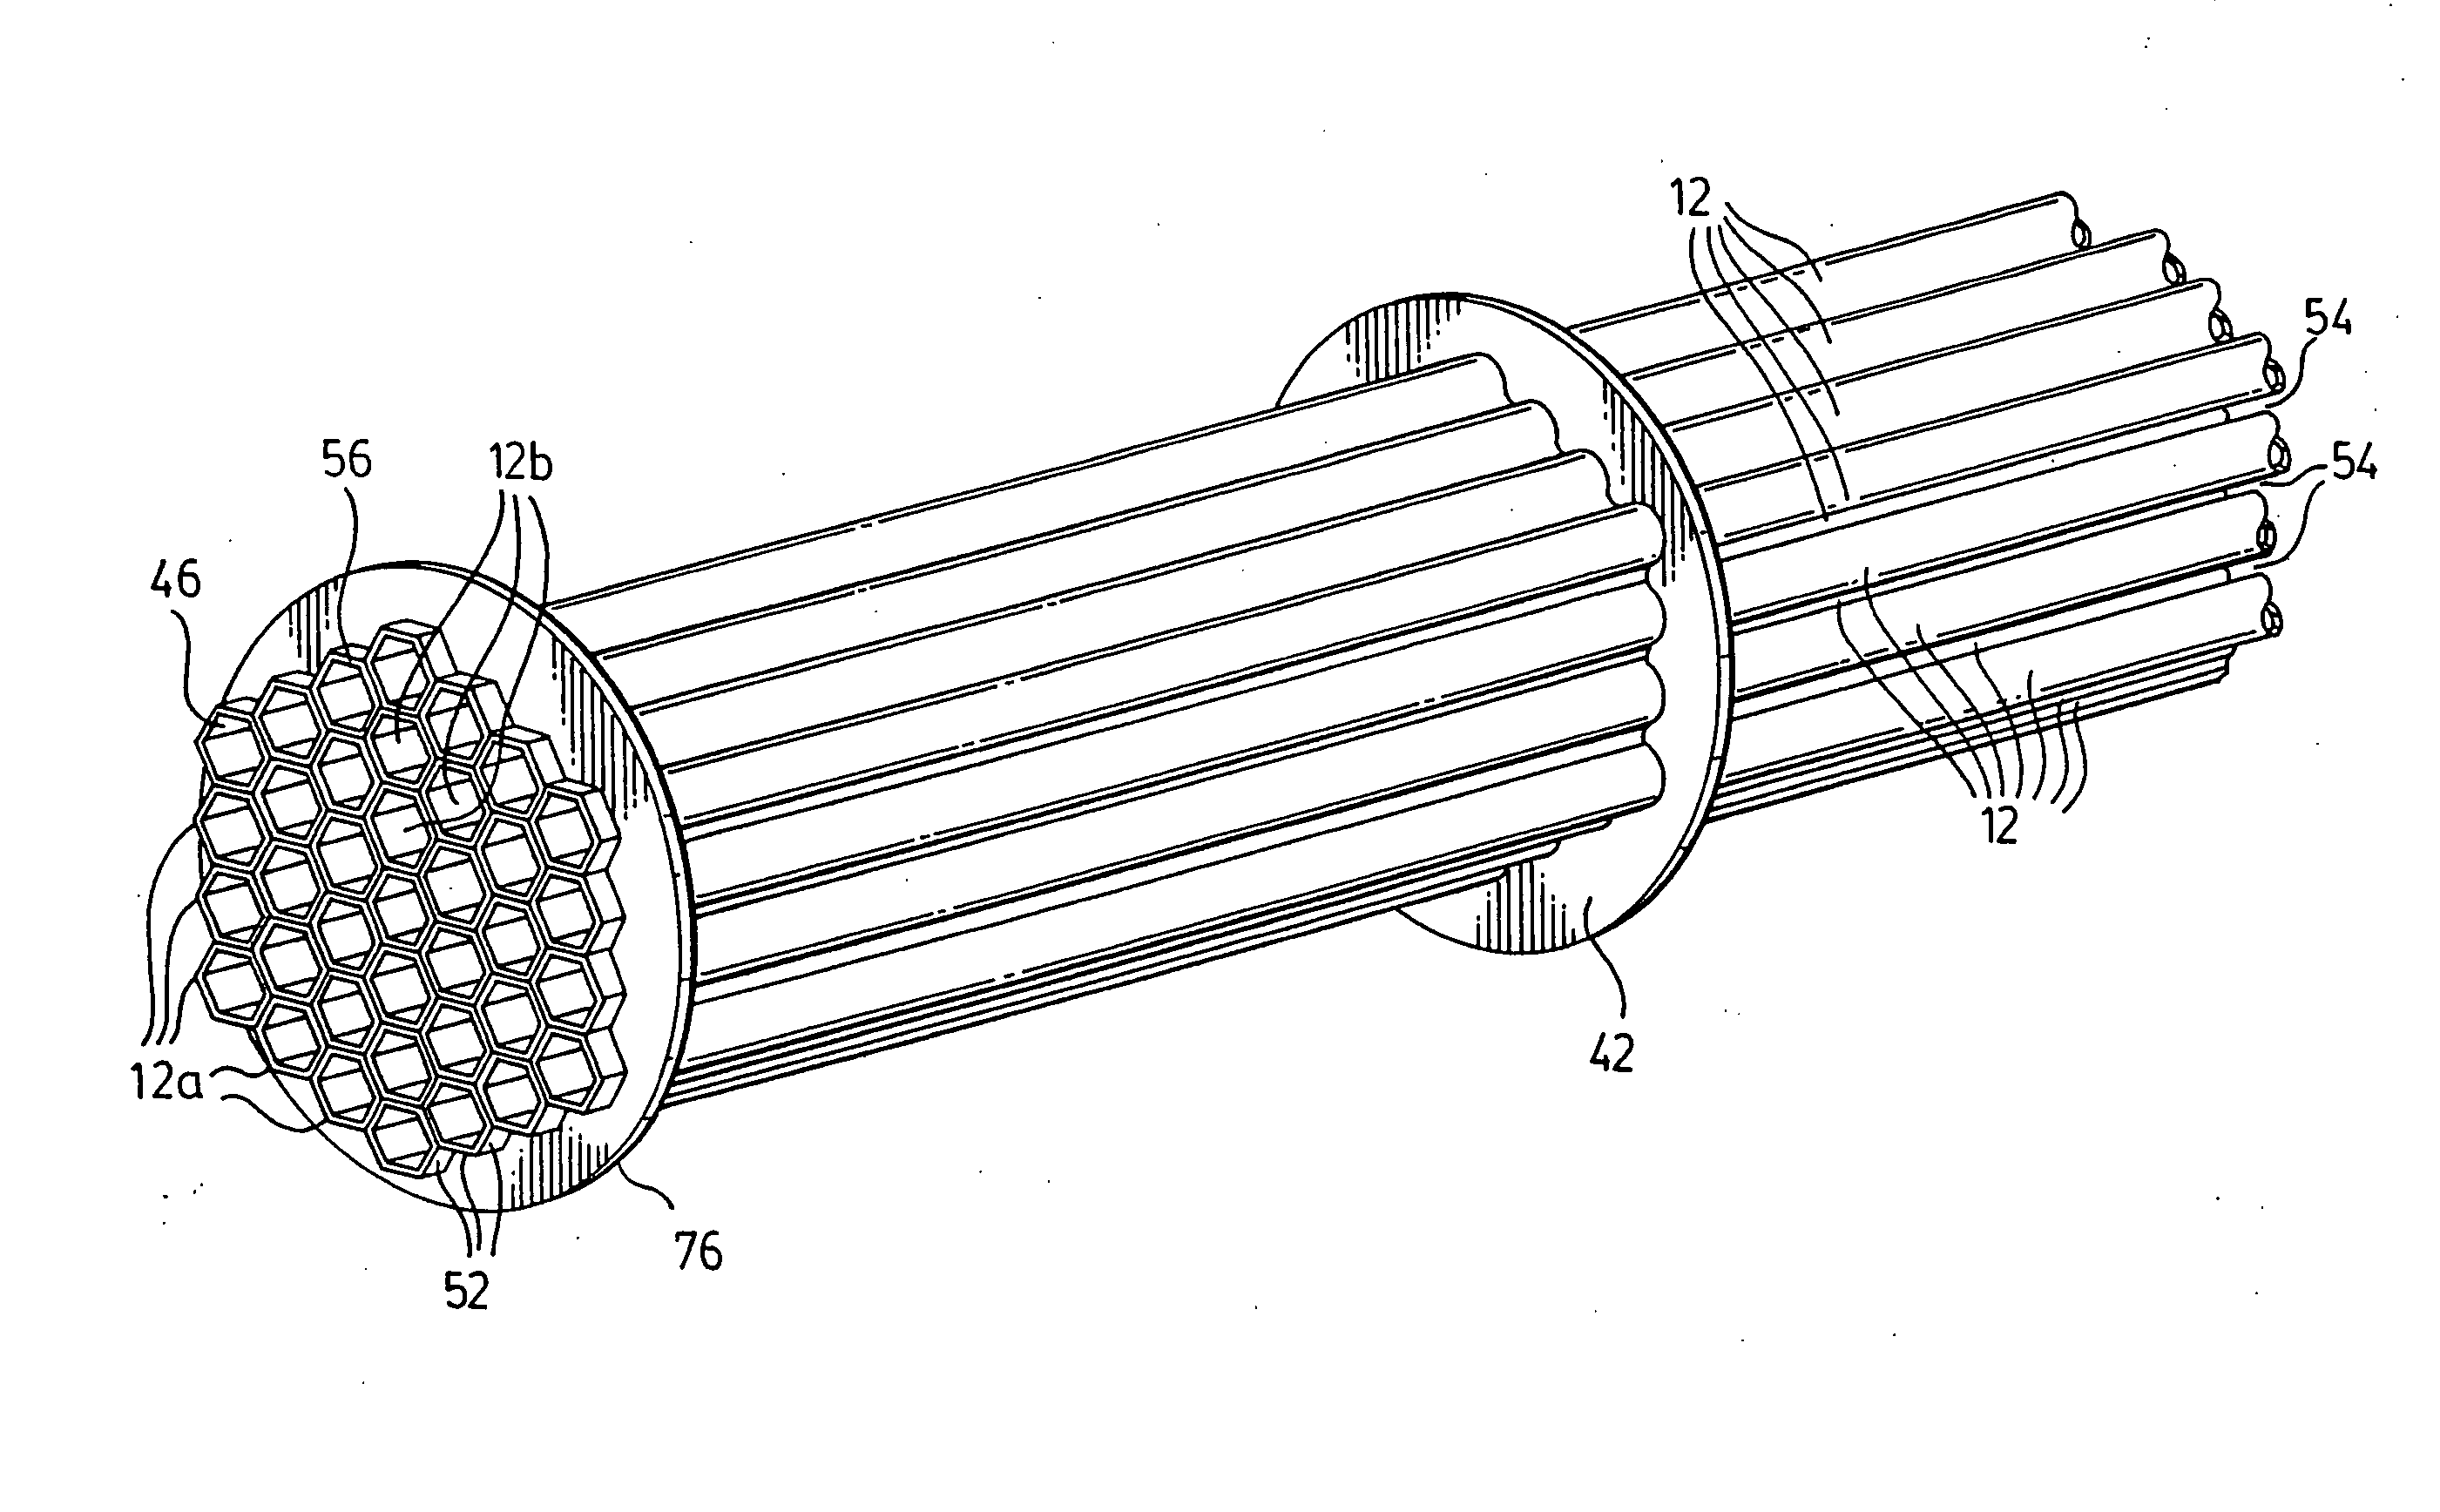 Tube bundle heat exchanger comprising tubes with expanded sections